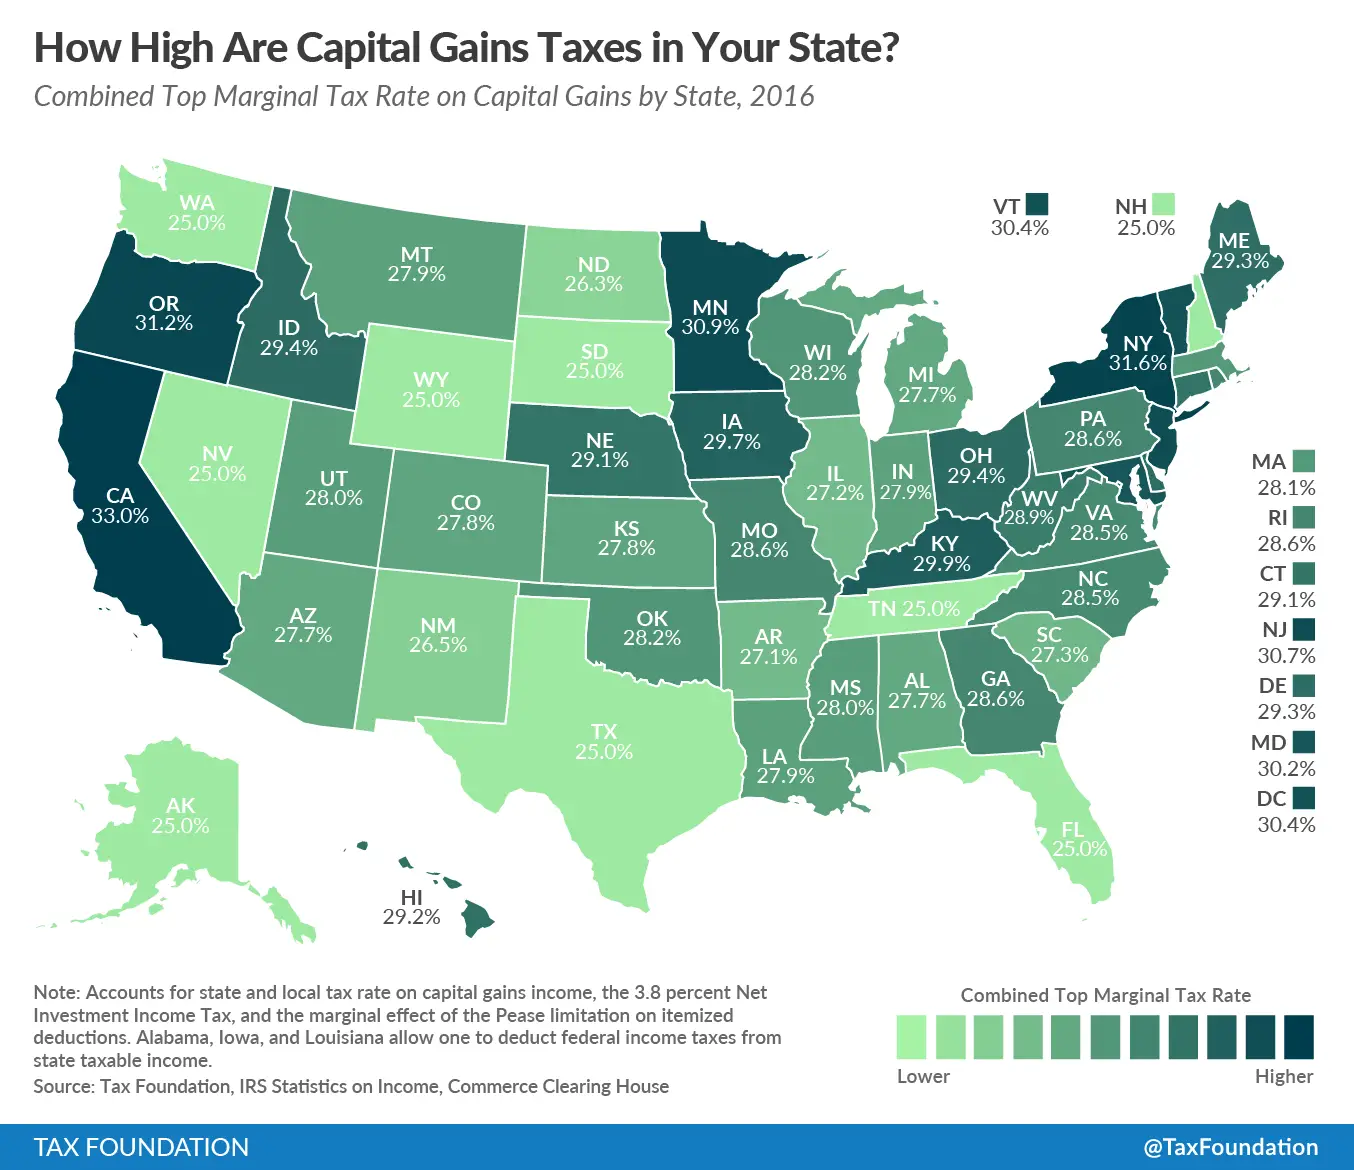 How High Are Capital Gains Taxes in Your State?